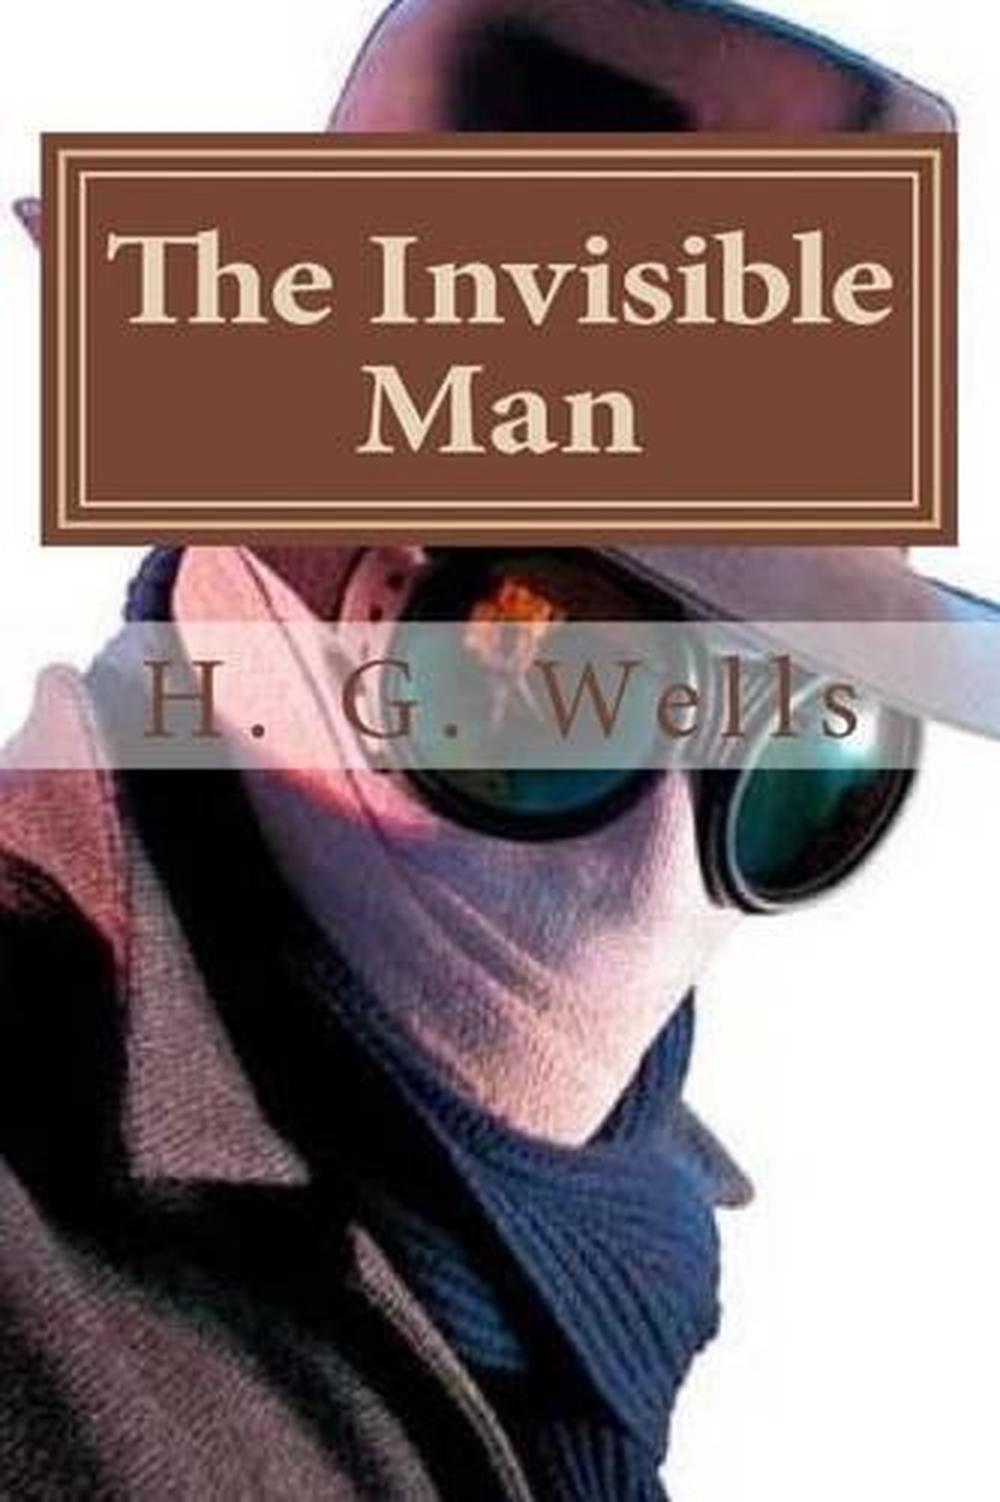 The Invisible Man By Hg Wells English Paperback Book Free Shipping